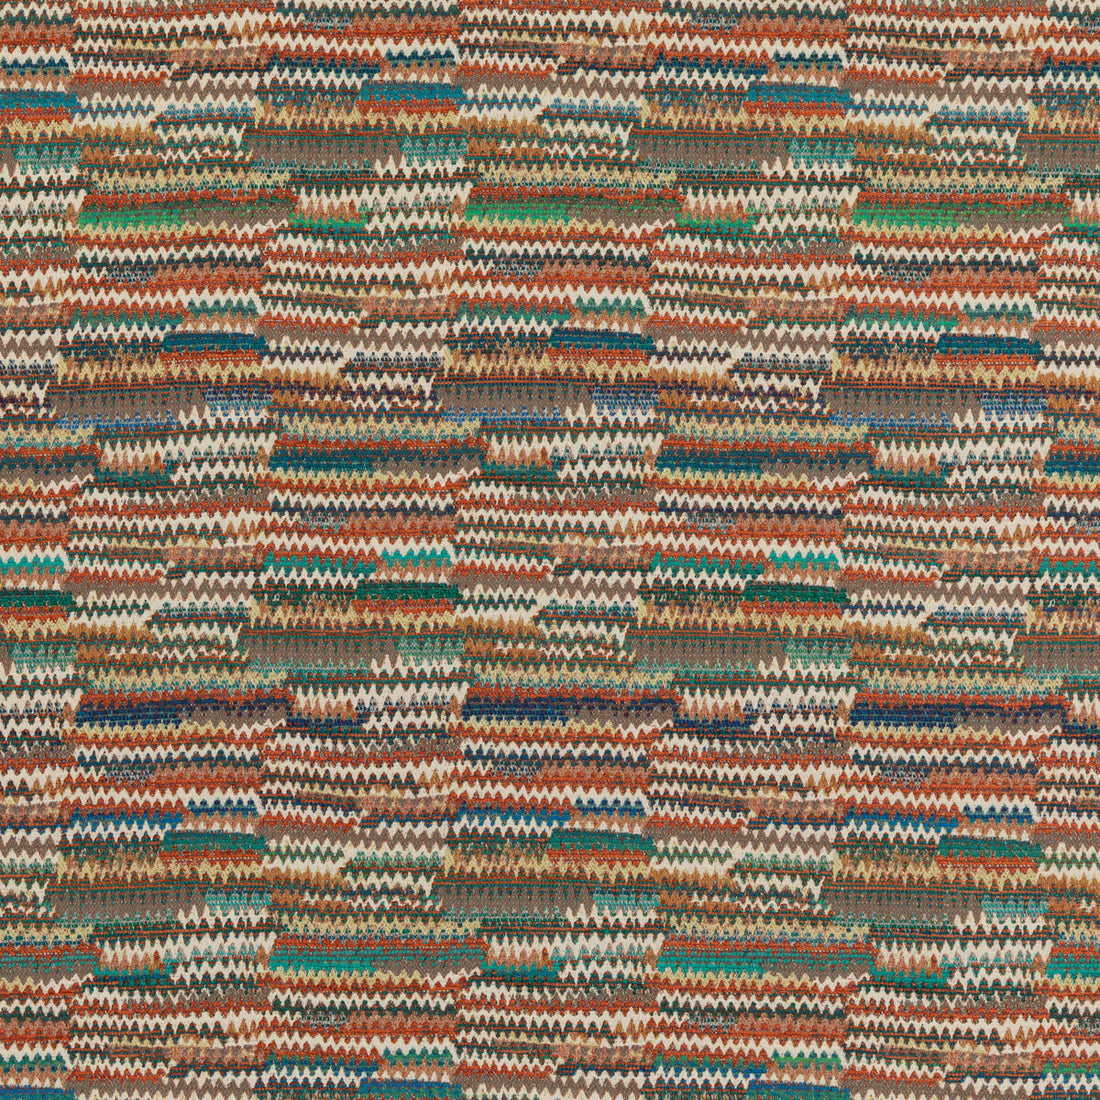 Landscape fabric in teal/spice color - pattern FD781.T69.0 - by Mulberry in the Modern Country II collection